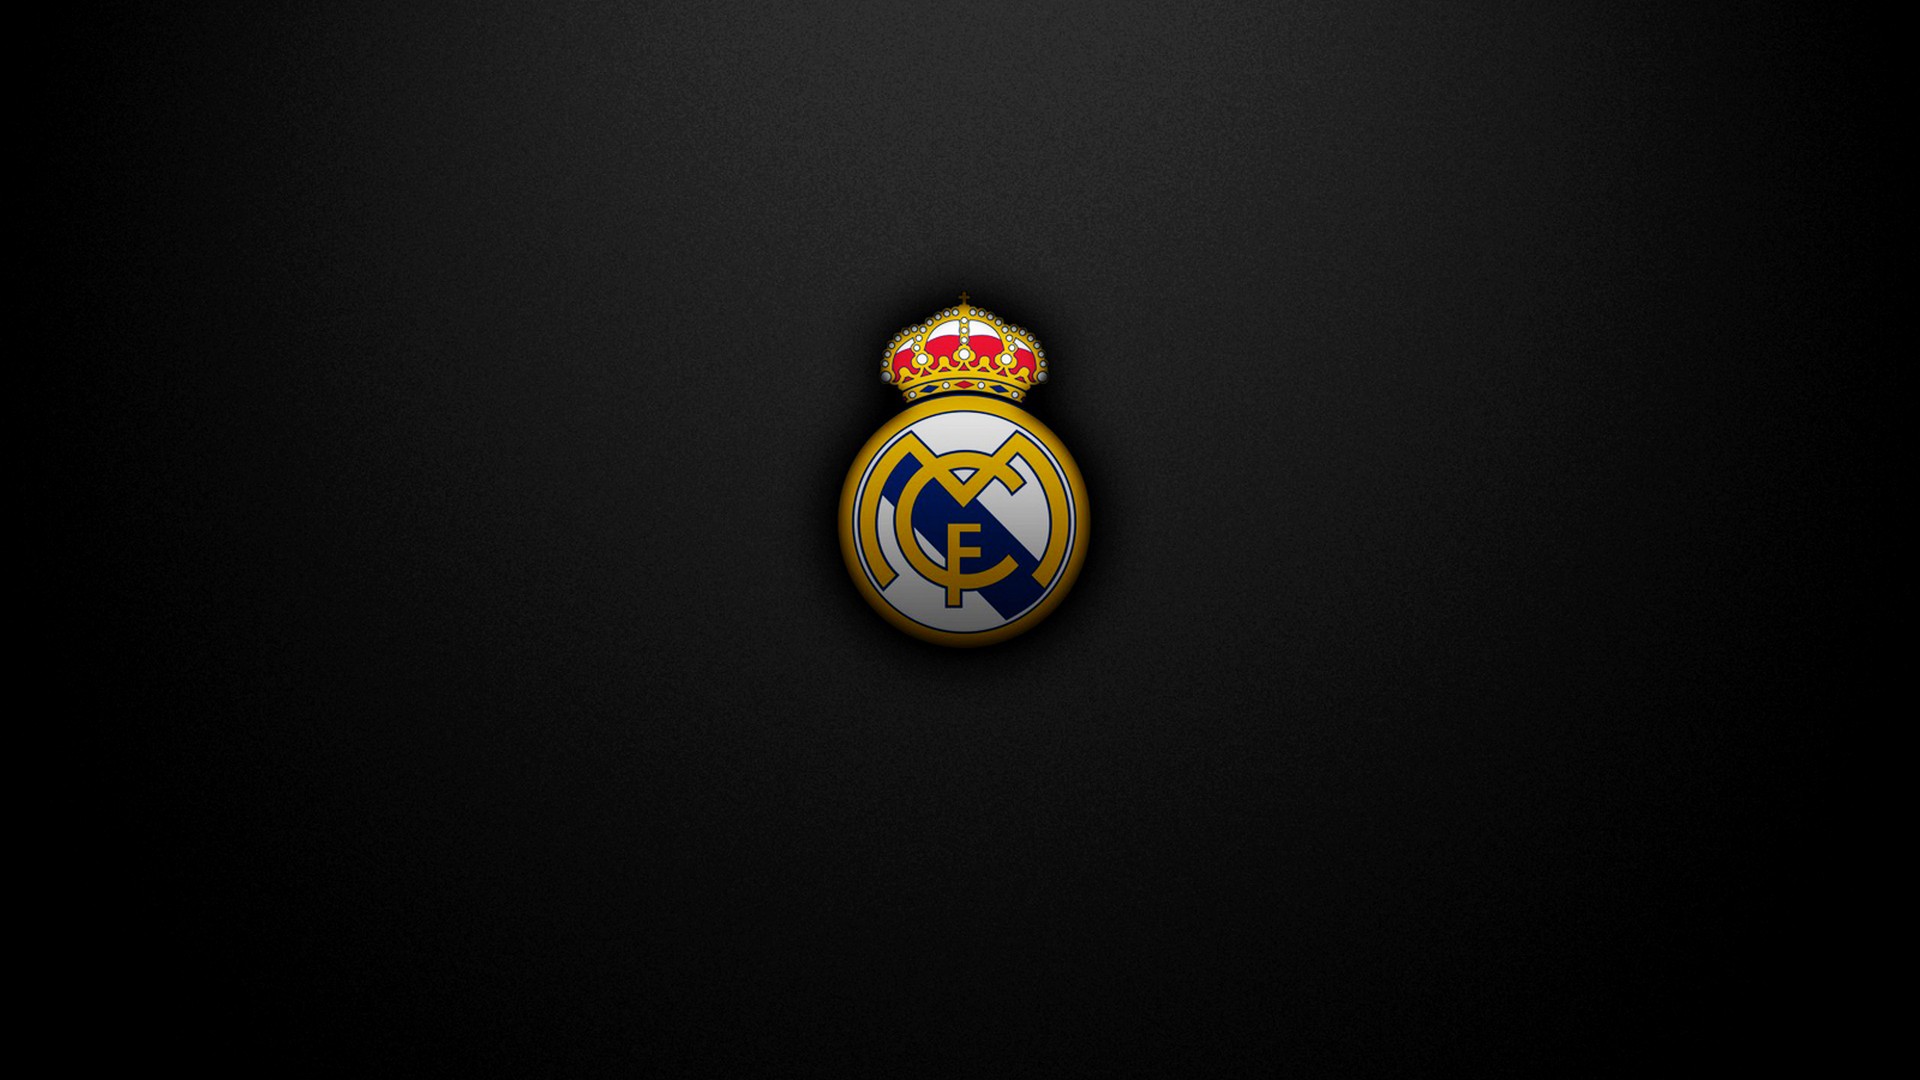 HD Backgrounds Real Madrid with resolution 1920x1080 pixel. You can make this wallpaper for your Mac or Windows Desktop Background, iPhone, Android or Tablet and another Smartphone device